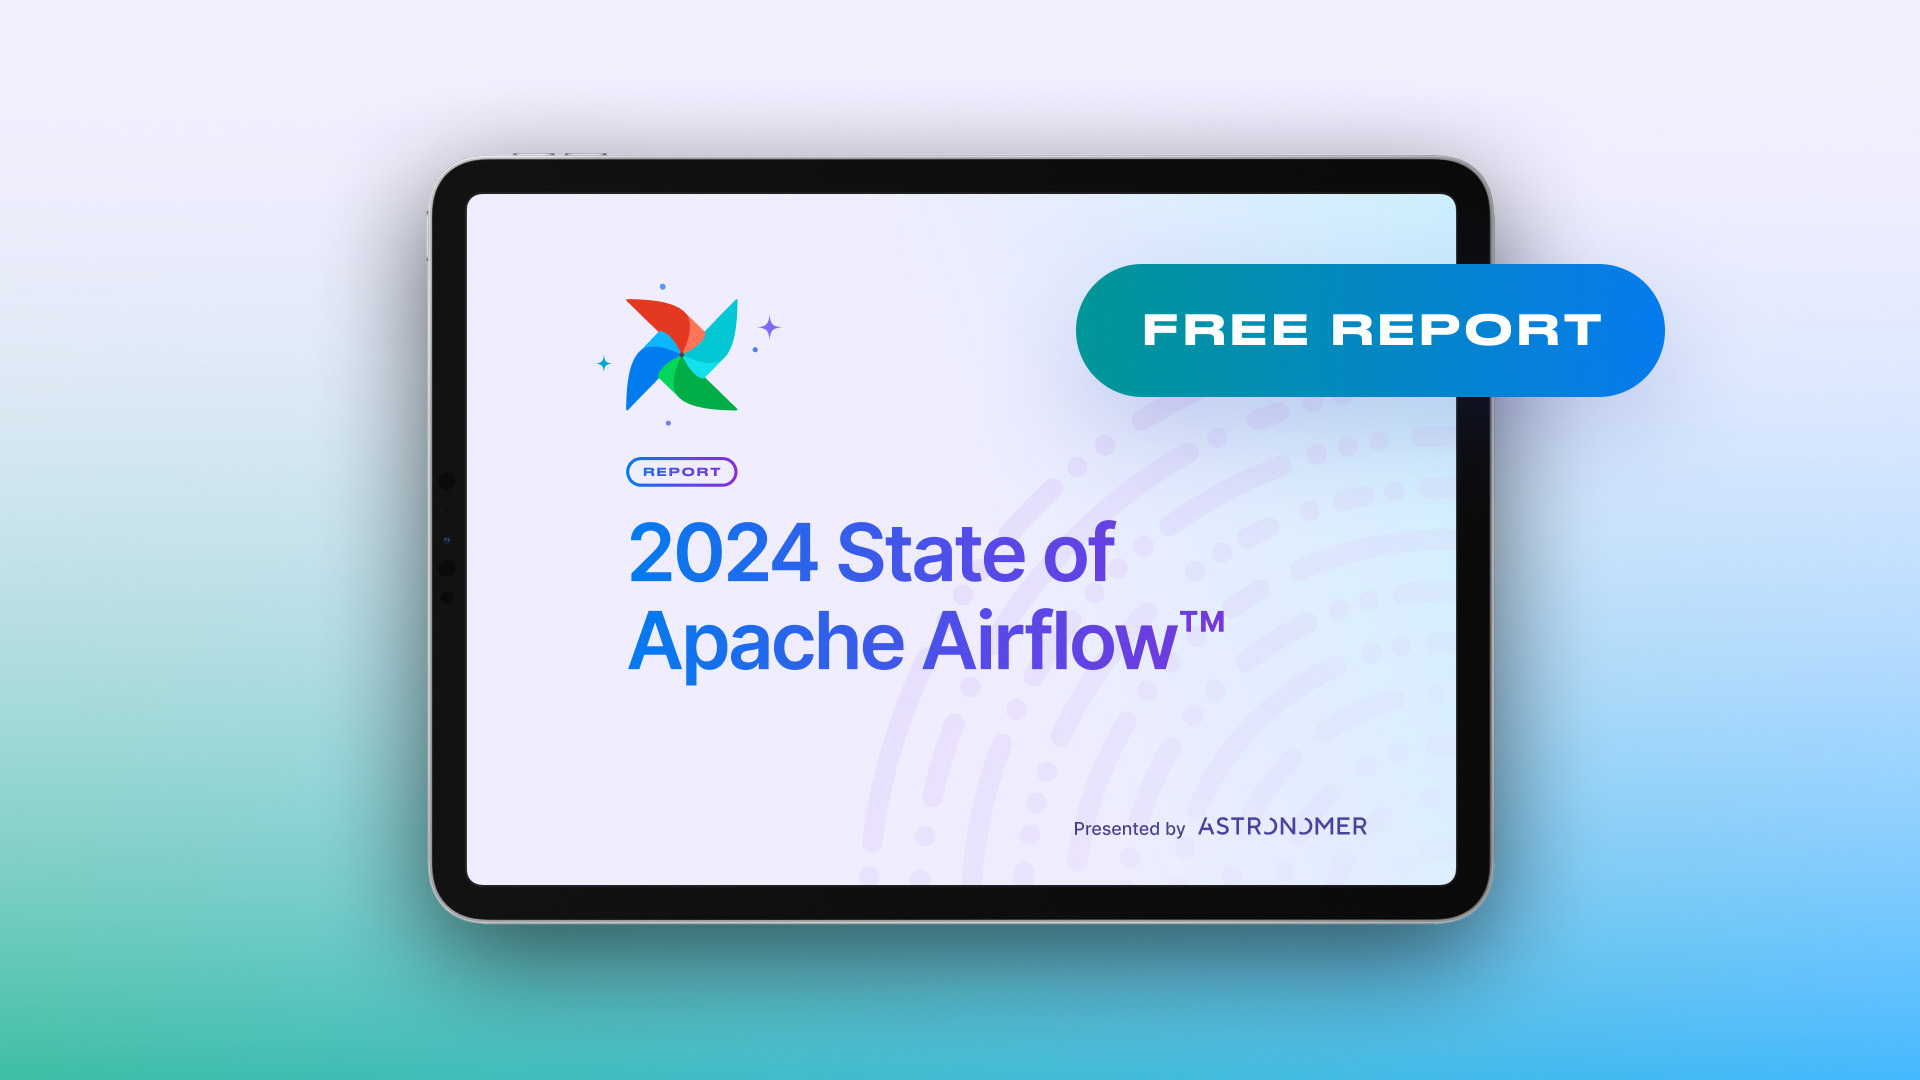 2024 State of Apache Airflow Presented by Astronomer